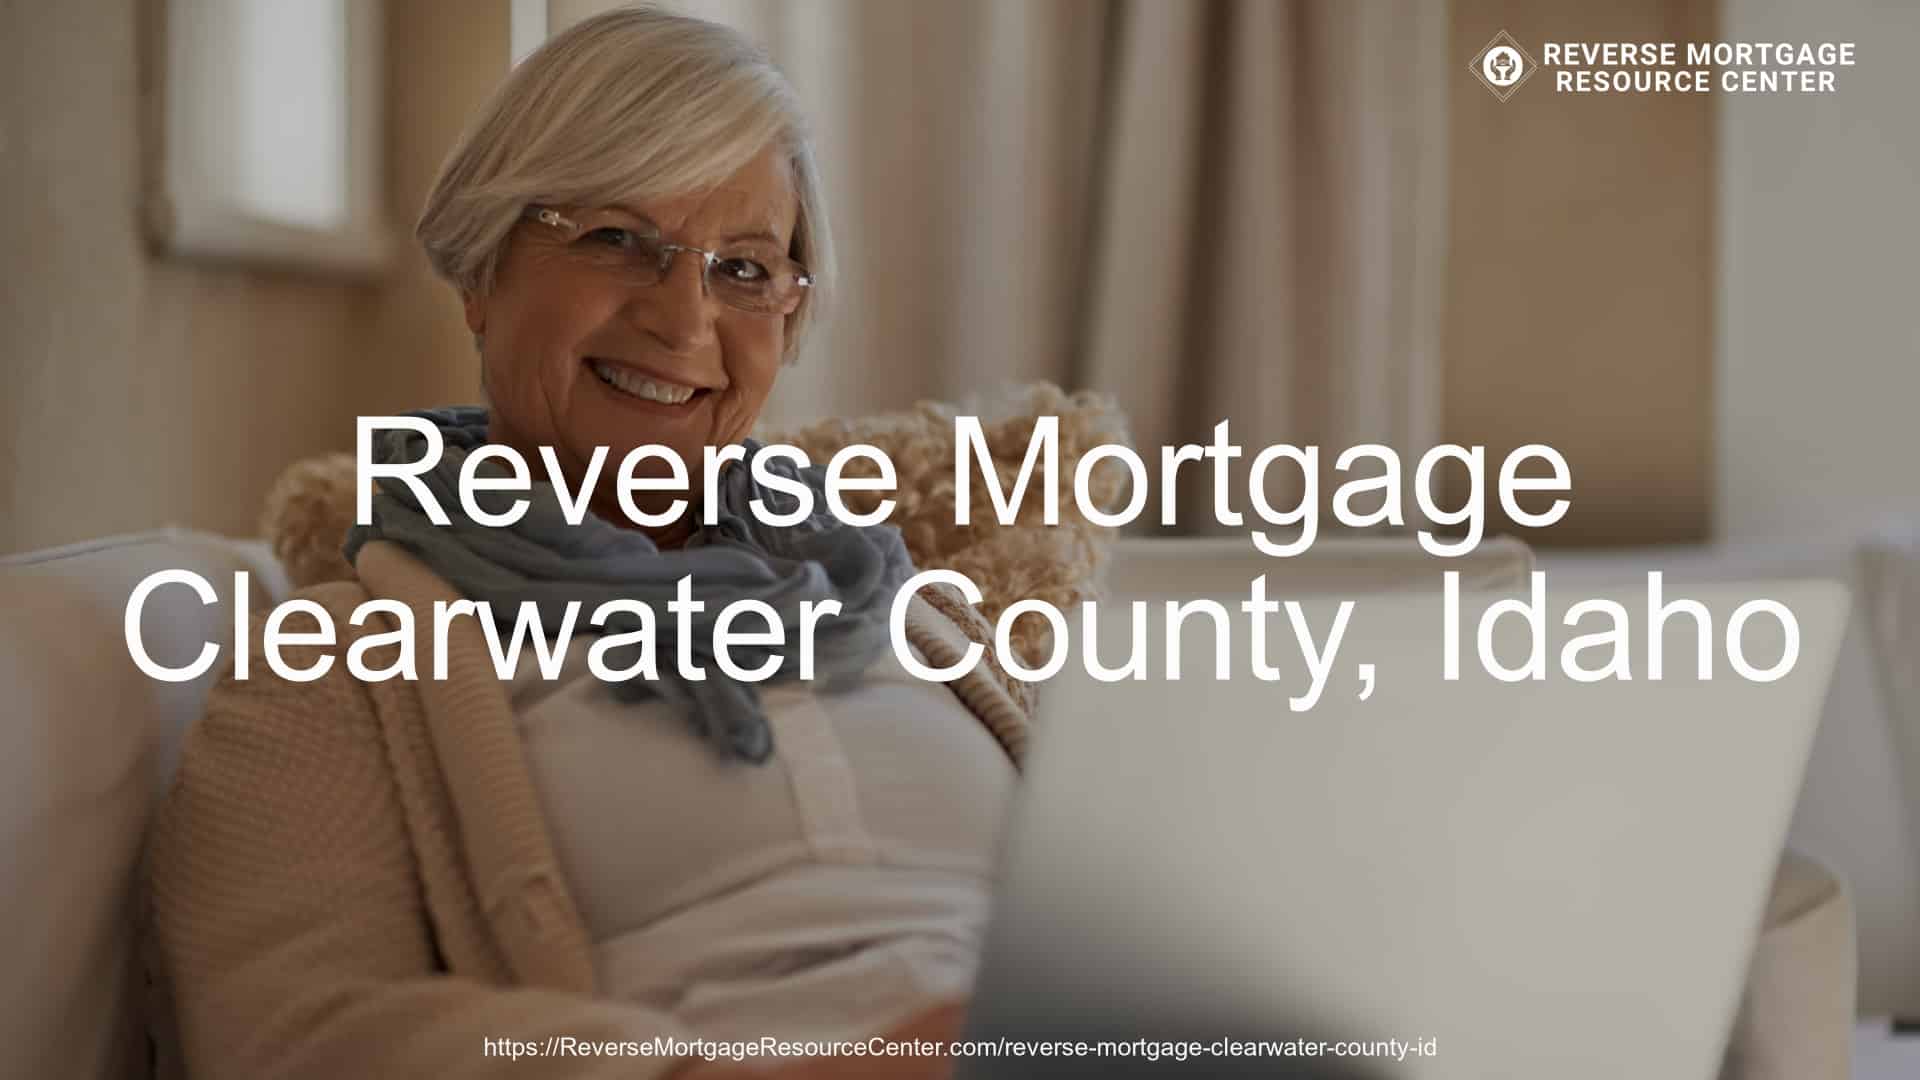 Reverse Mortgage Loans in Clearwater County Idaho